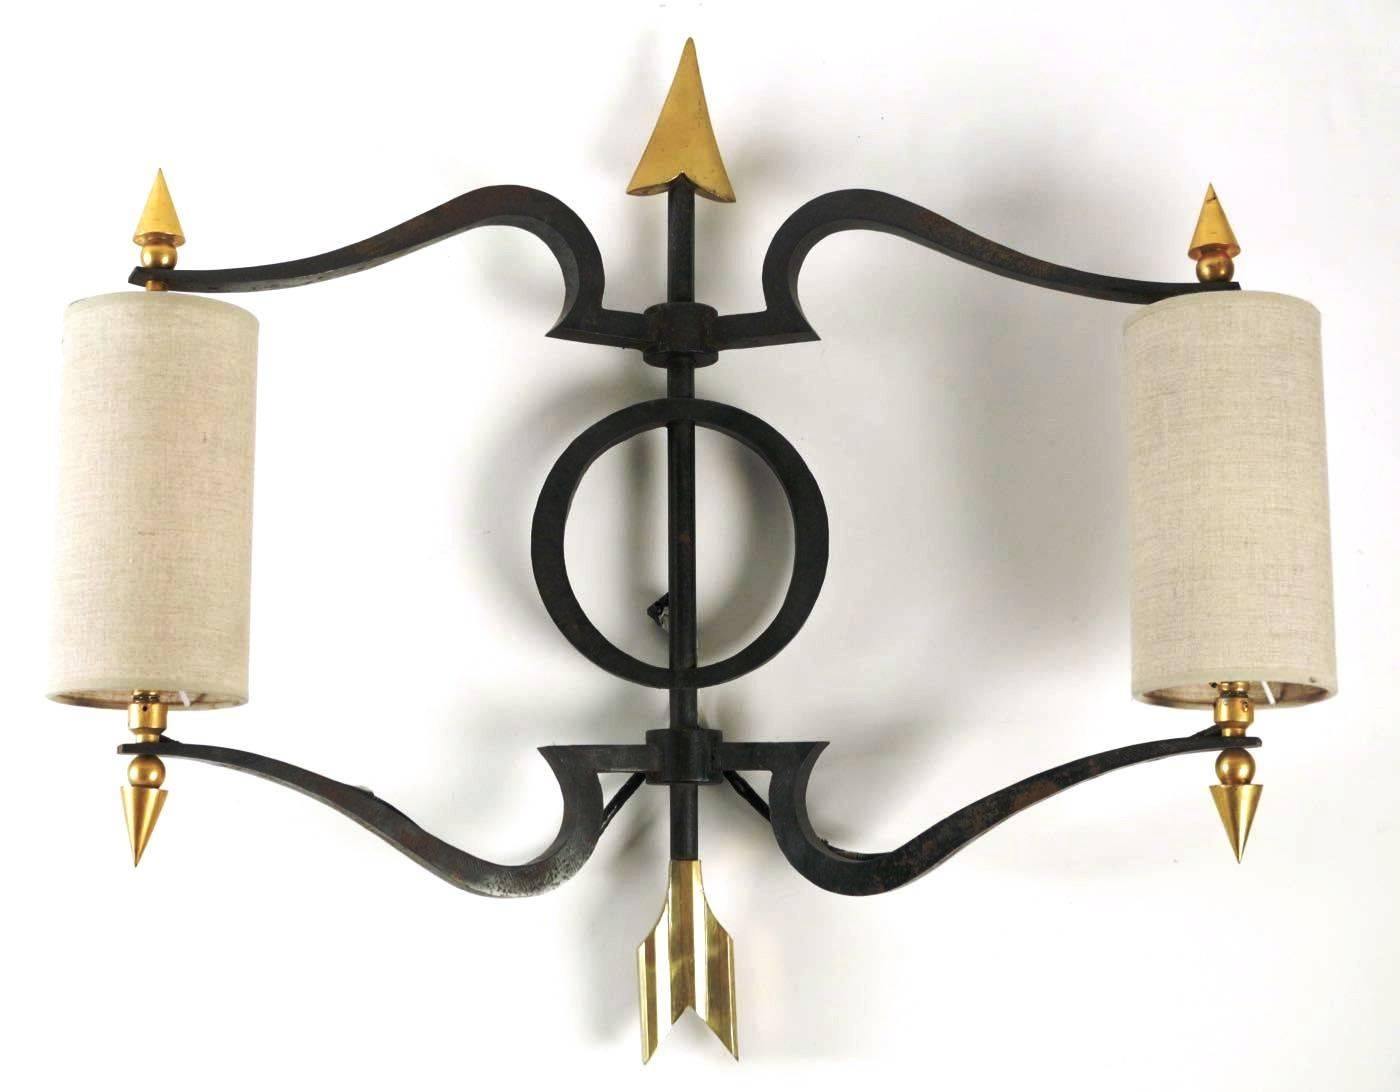 Spectacular Pair of Bronze Wall Lights by Jacques Tournus, France, 1940s (Vergoldet)